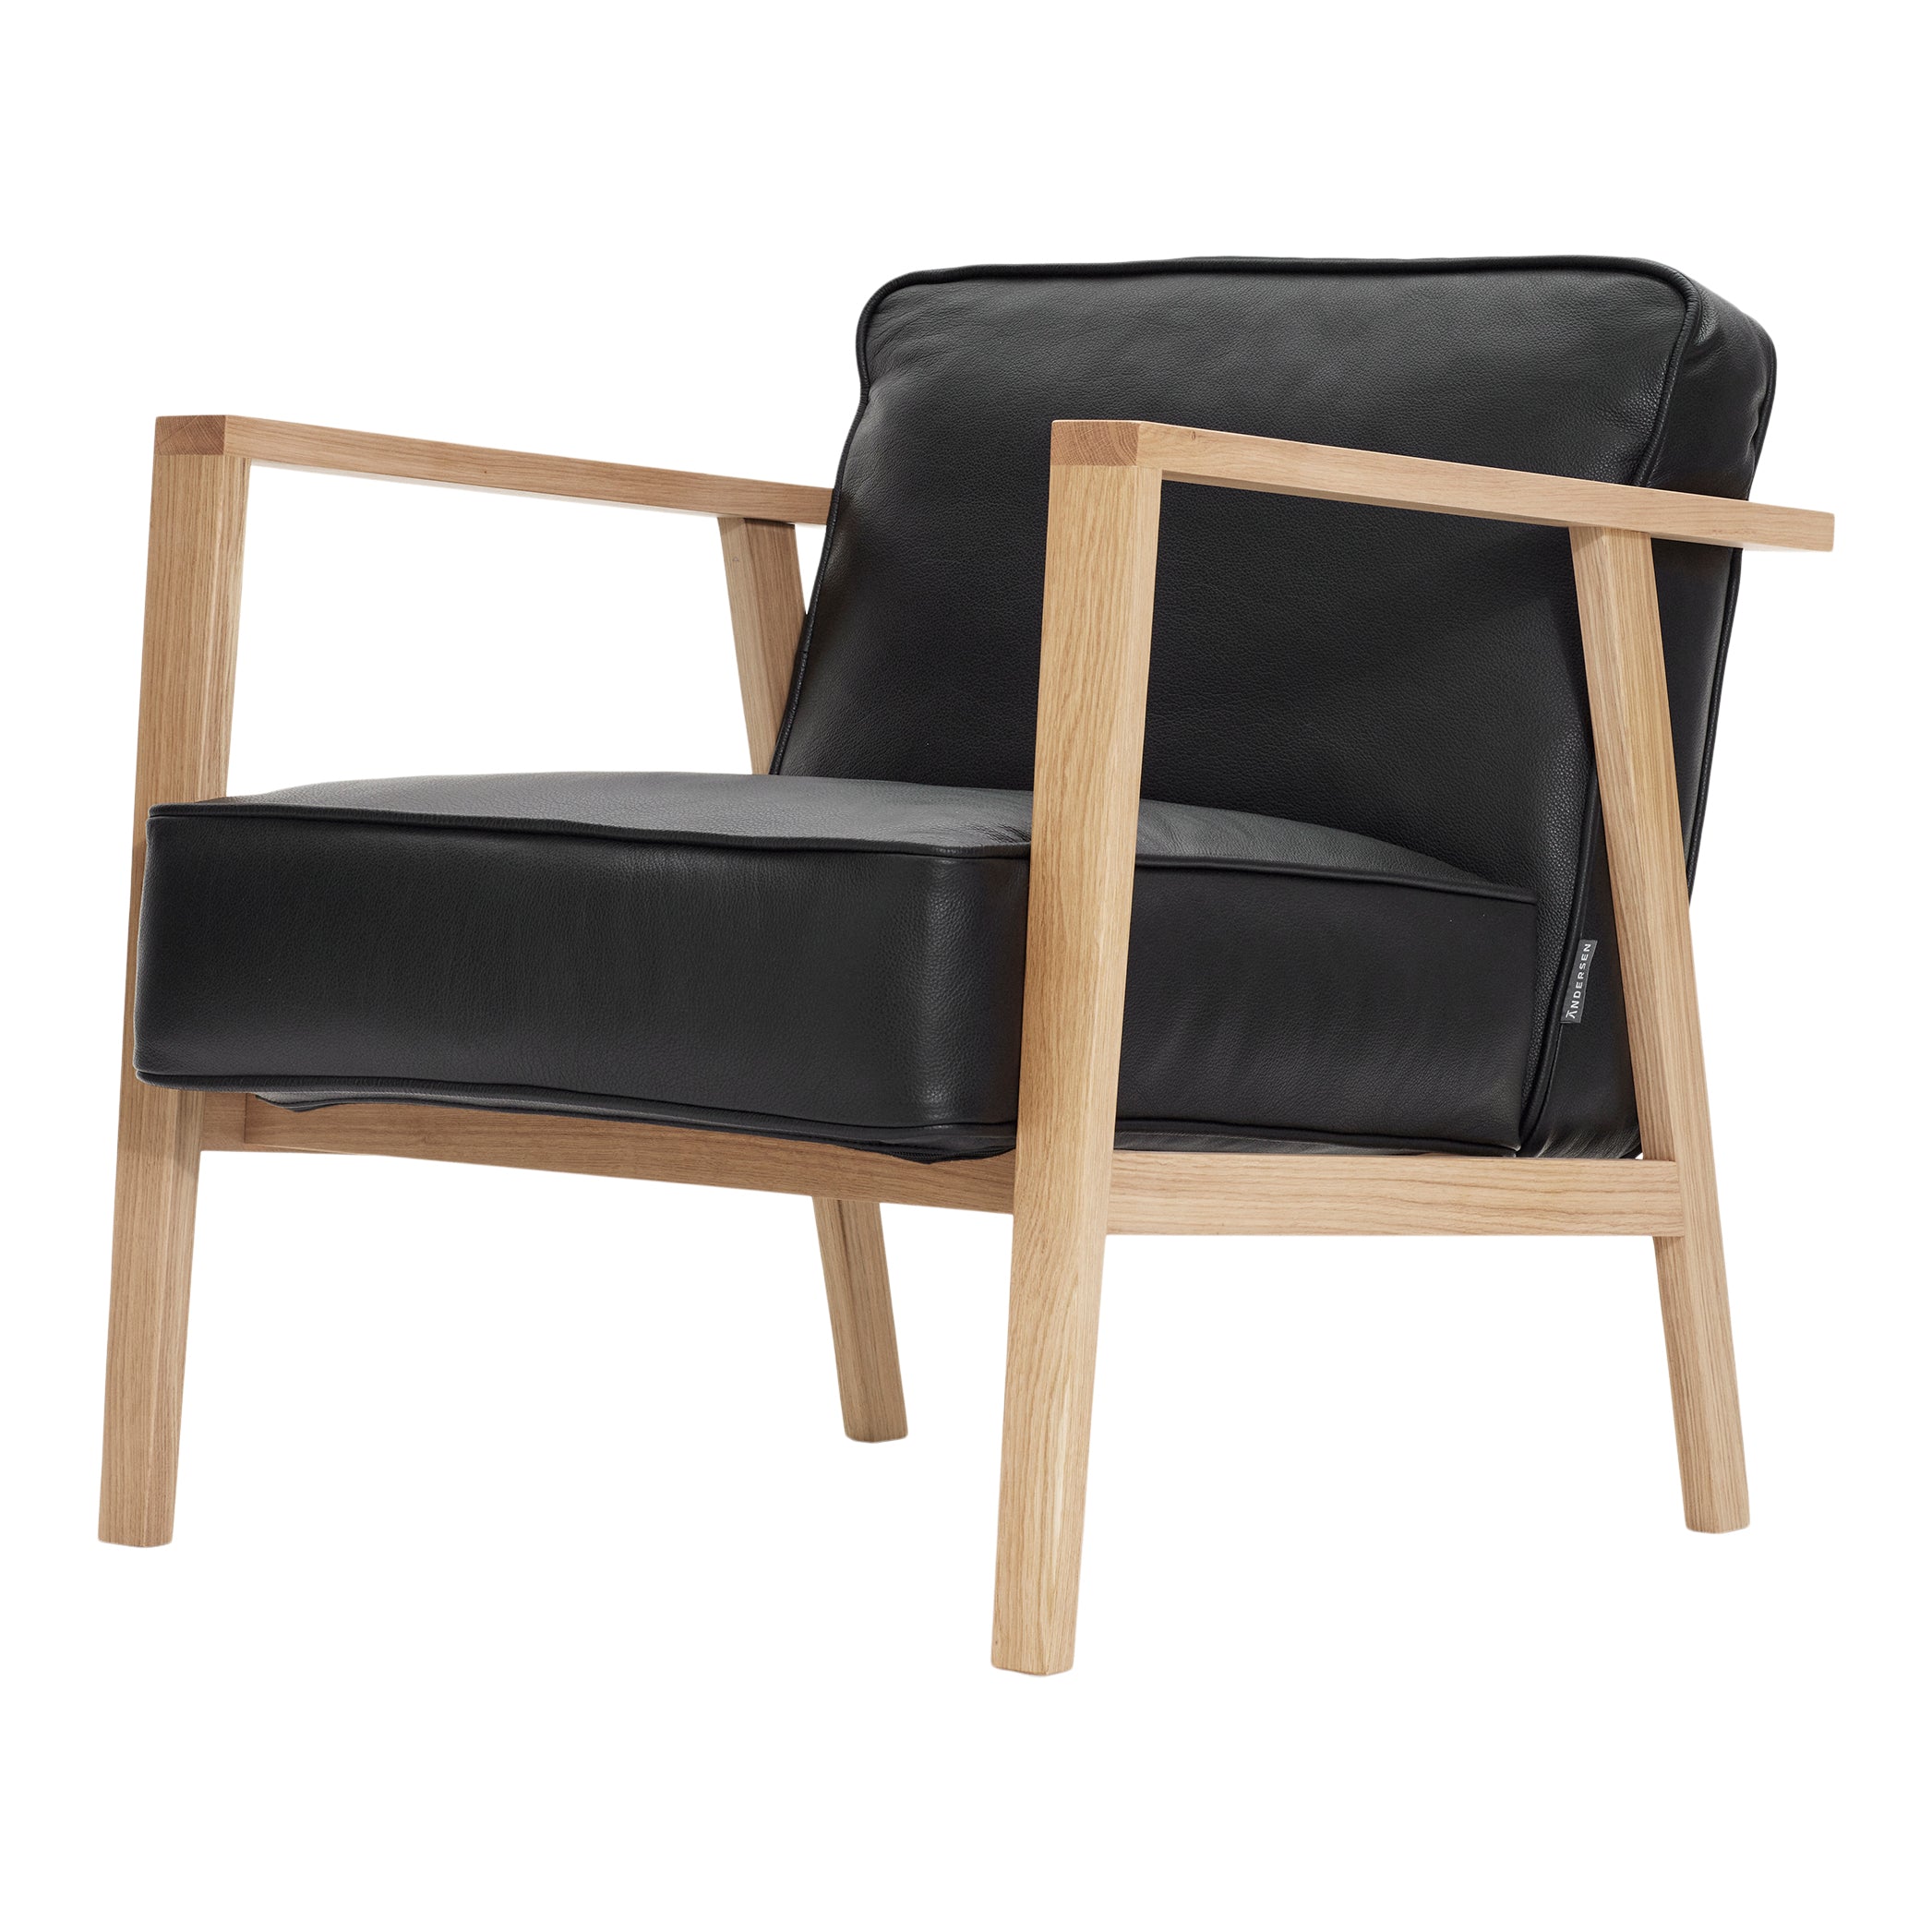 Andersen Furniture - LC1 Lounge chair - black leather/frame in oak